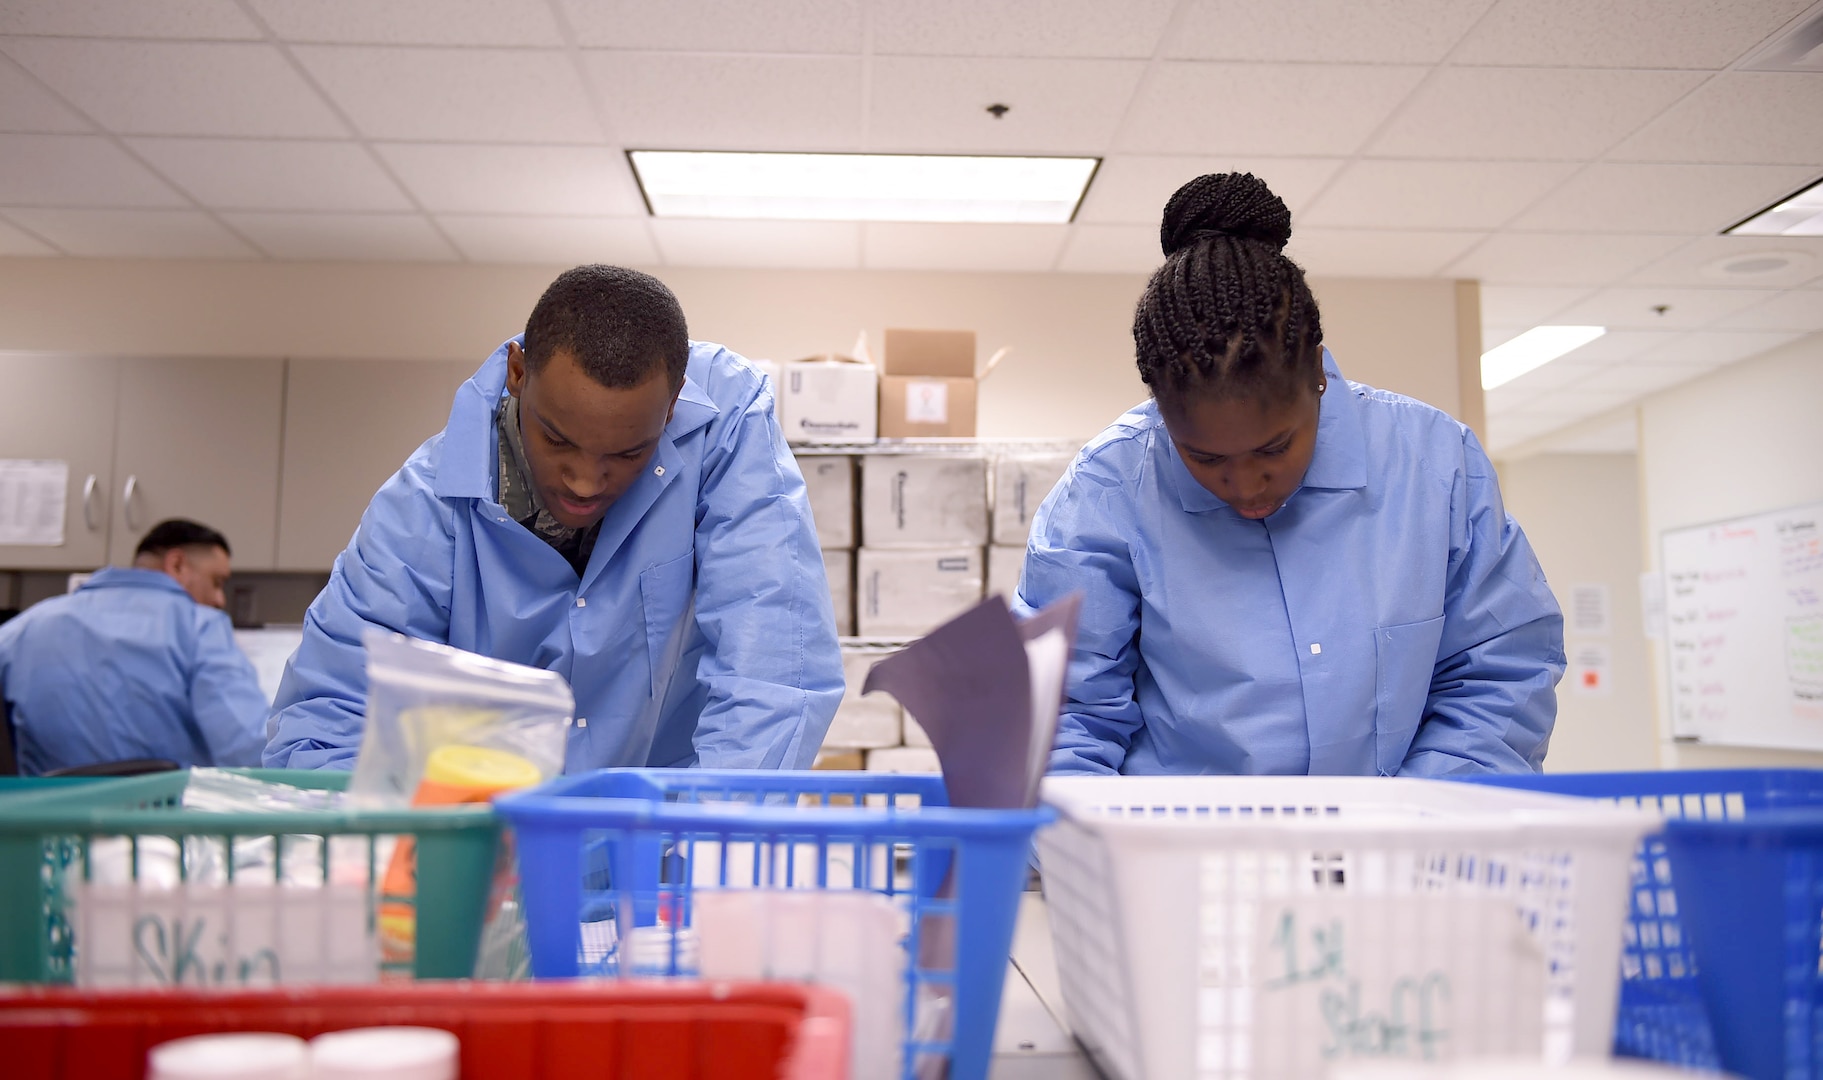 Senior Airman Juron Woods, a 959th Clinical Support Squadron histology technician, and Airman 1st Class Thiouny Samba, a student assigned to the 382nd Training Squadron, sort through patient samples at the San Antonio Military Medical Center, Joint Base San Antonio-Fort Sam Houston, Jan. 13, 2017.  The pathology lab is part of the 959th Medical Group, one of seven groups in the 59th Medical Wing headquartered at Joint Base San Antonio-Lackland, Texas. (U.S. Air Force photo/Staff Sgt. Jerilyn Quintanilla) 